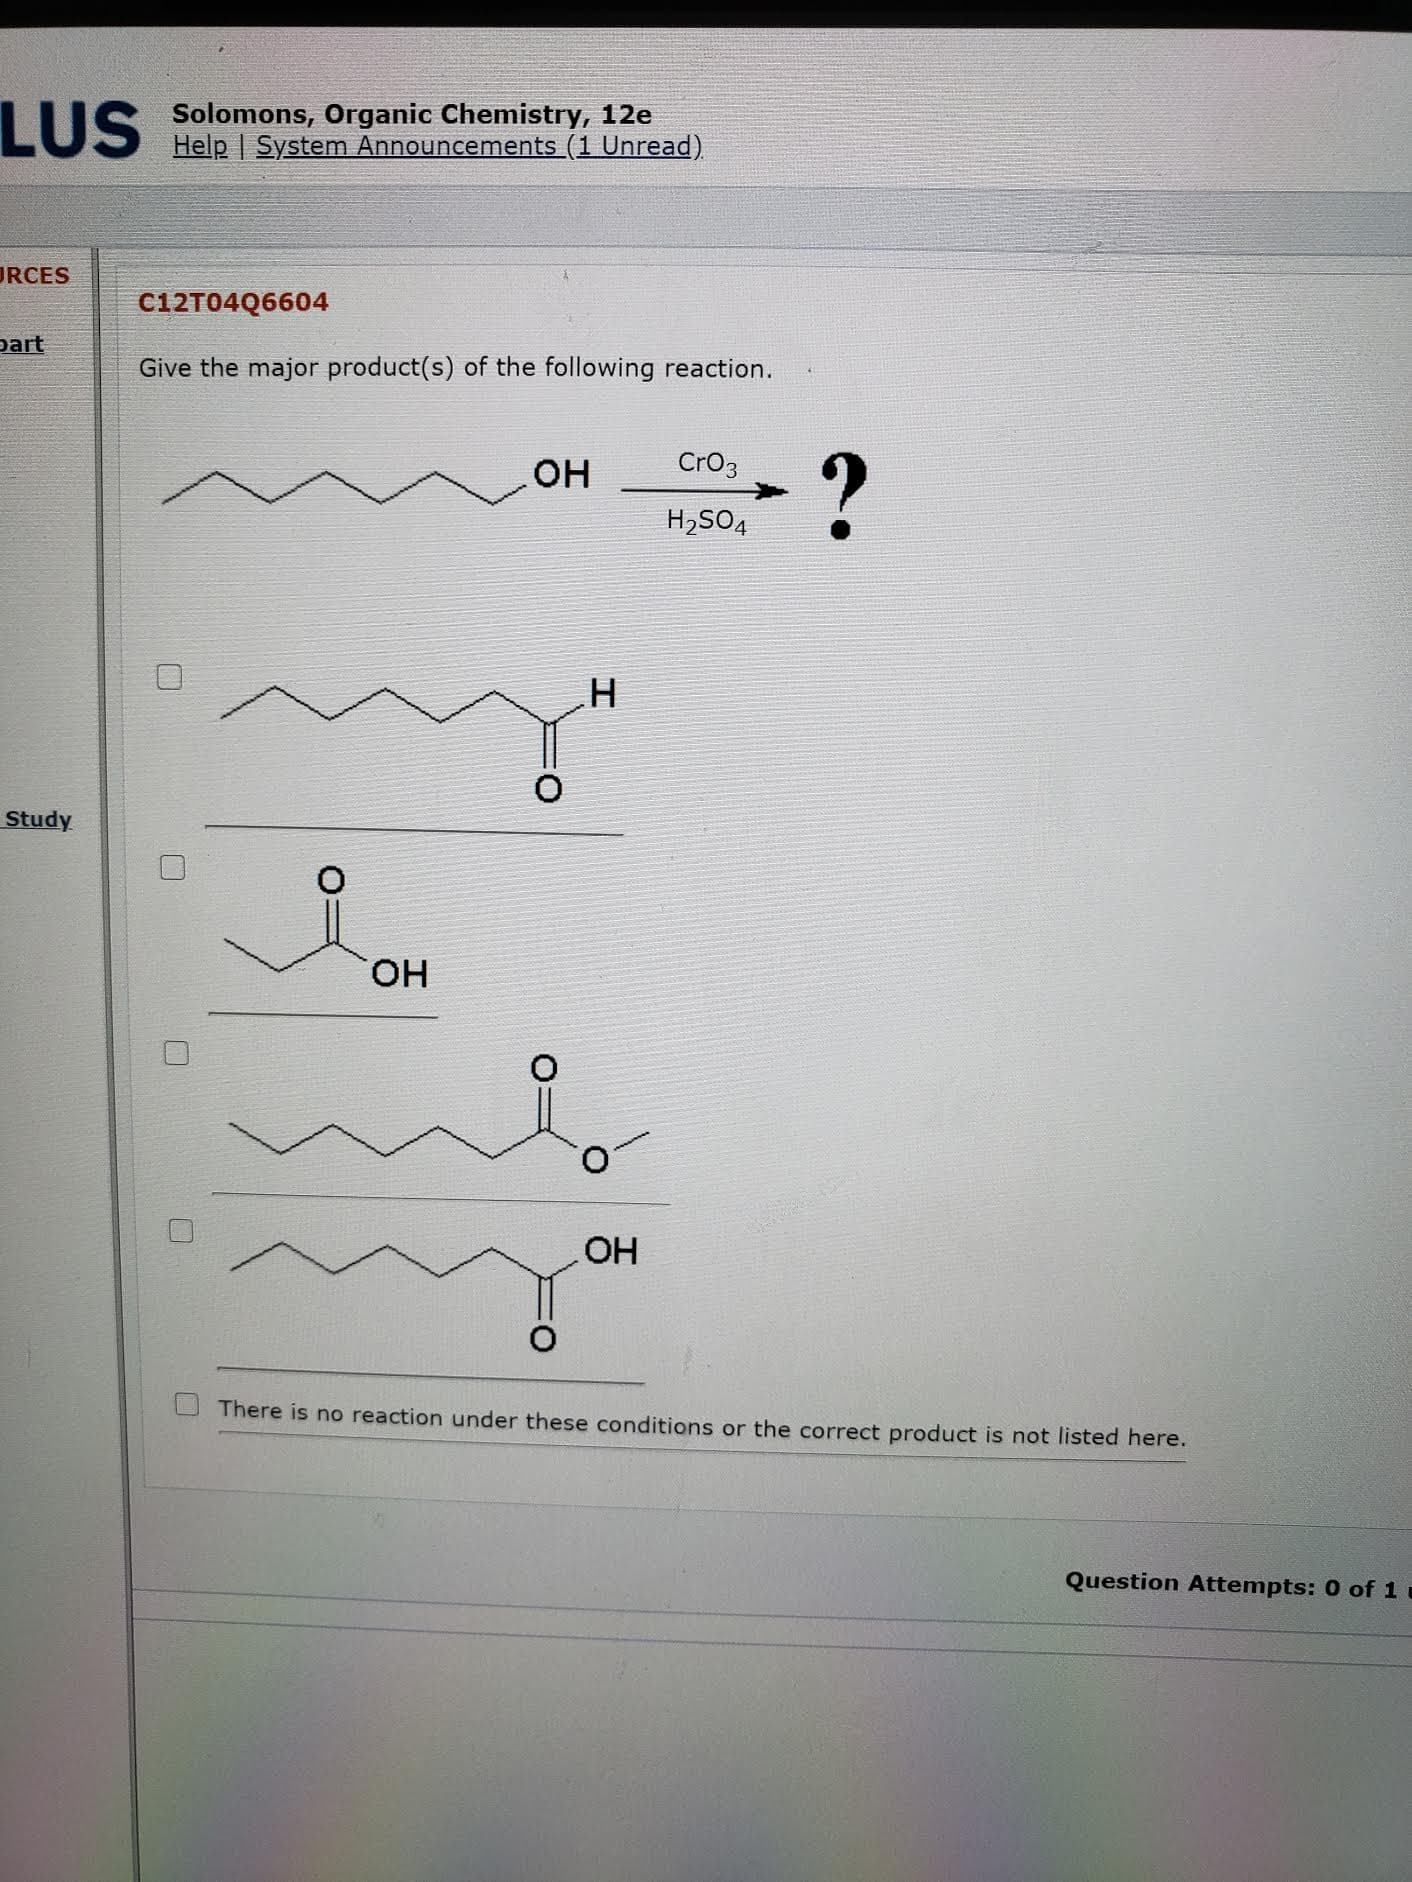 Give the major product(s) of the following reaction.
Cro3
H2SO4
H.
HO.
OH
There is no reaction under these conditions or the correct product is not listed here.
